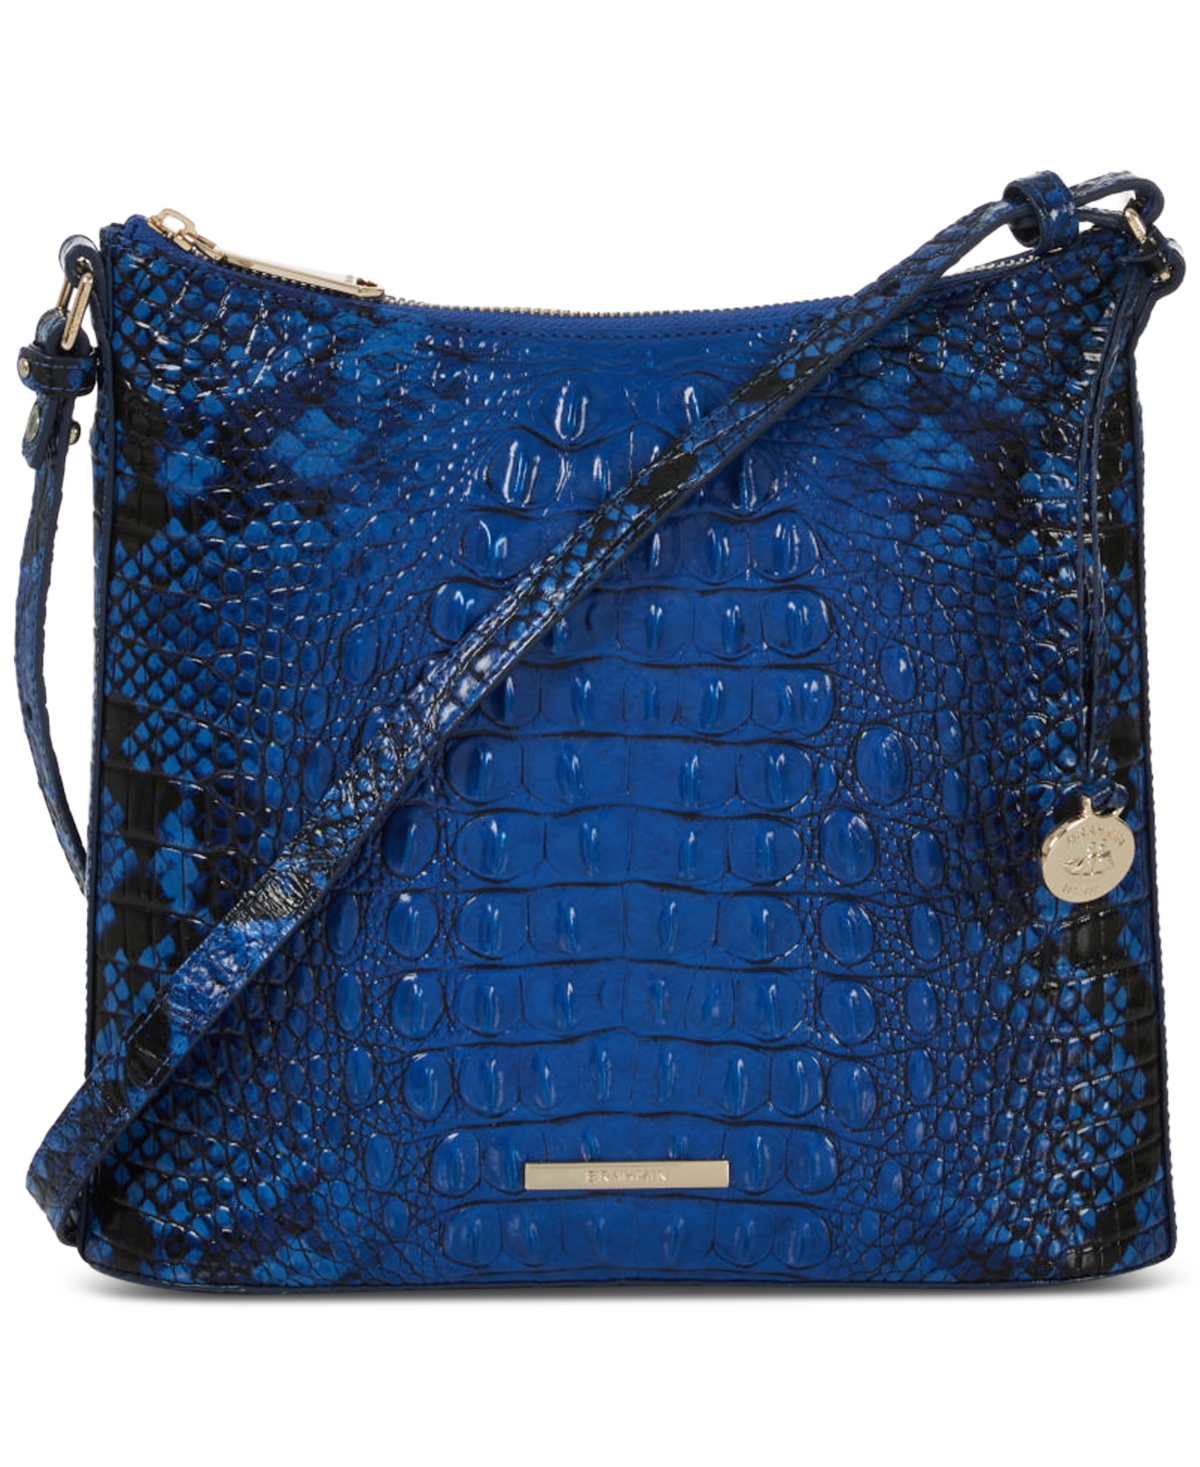 BRAHMIN Melbourne Collection Katie Leather Crocodile-Embossed